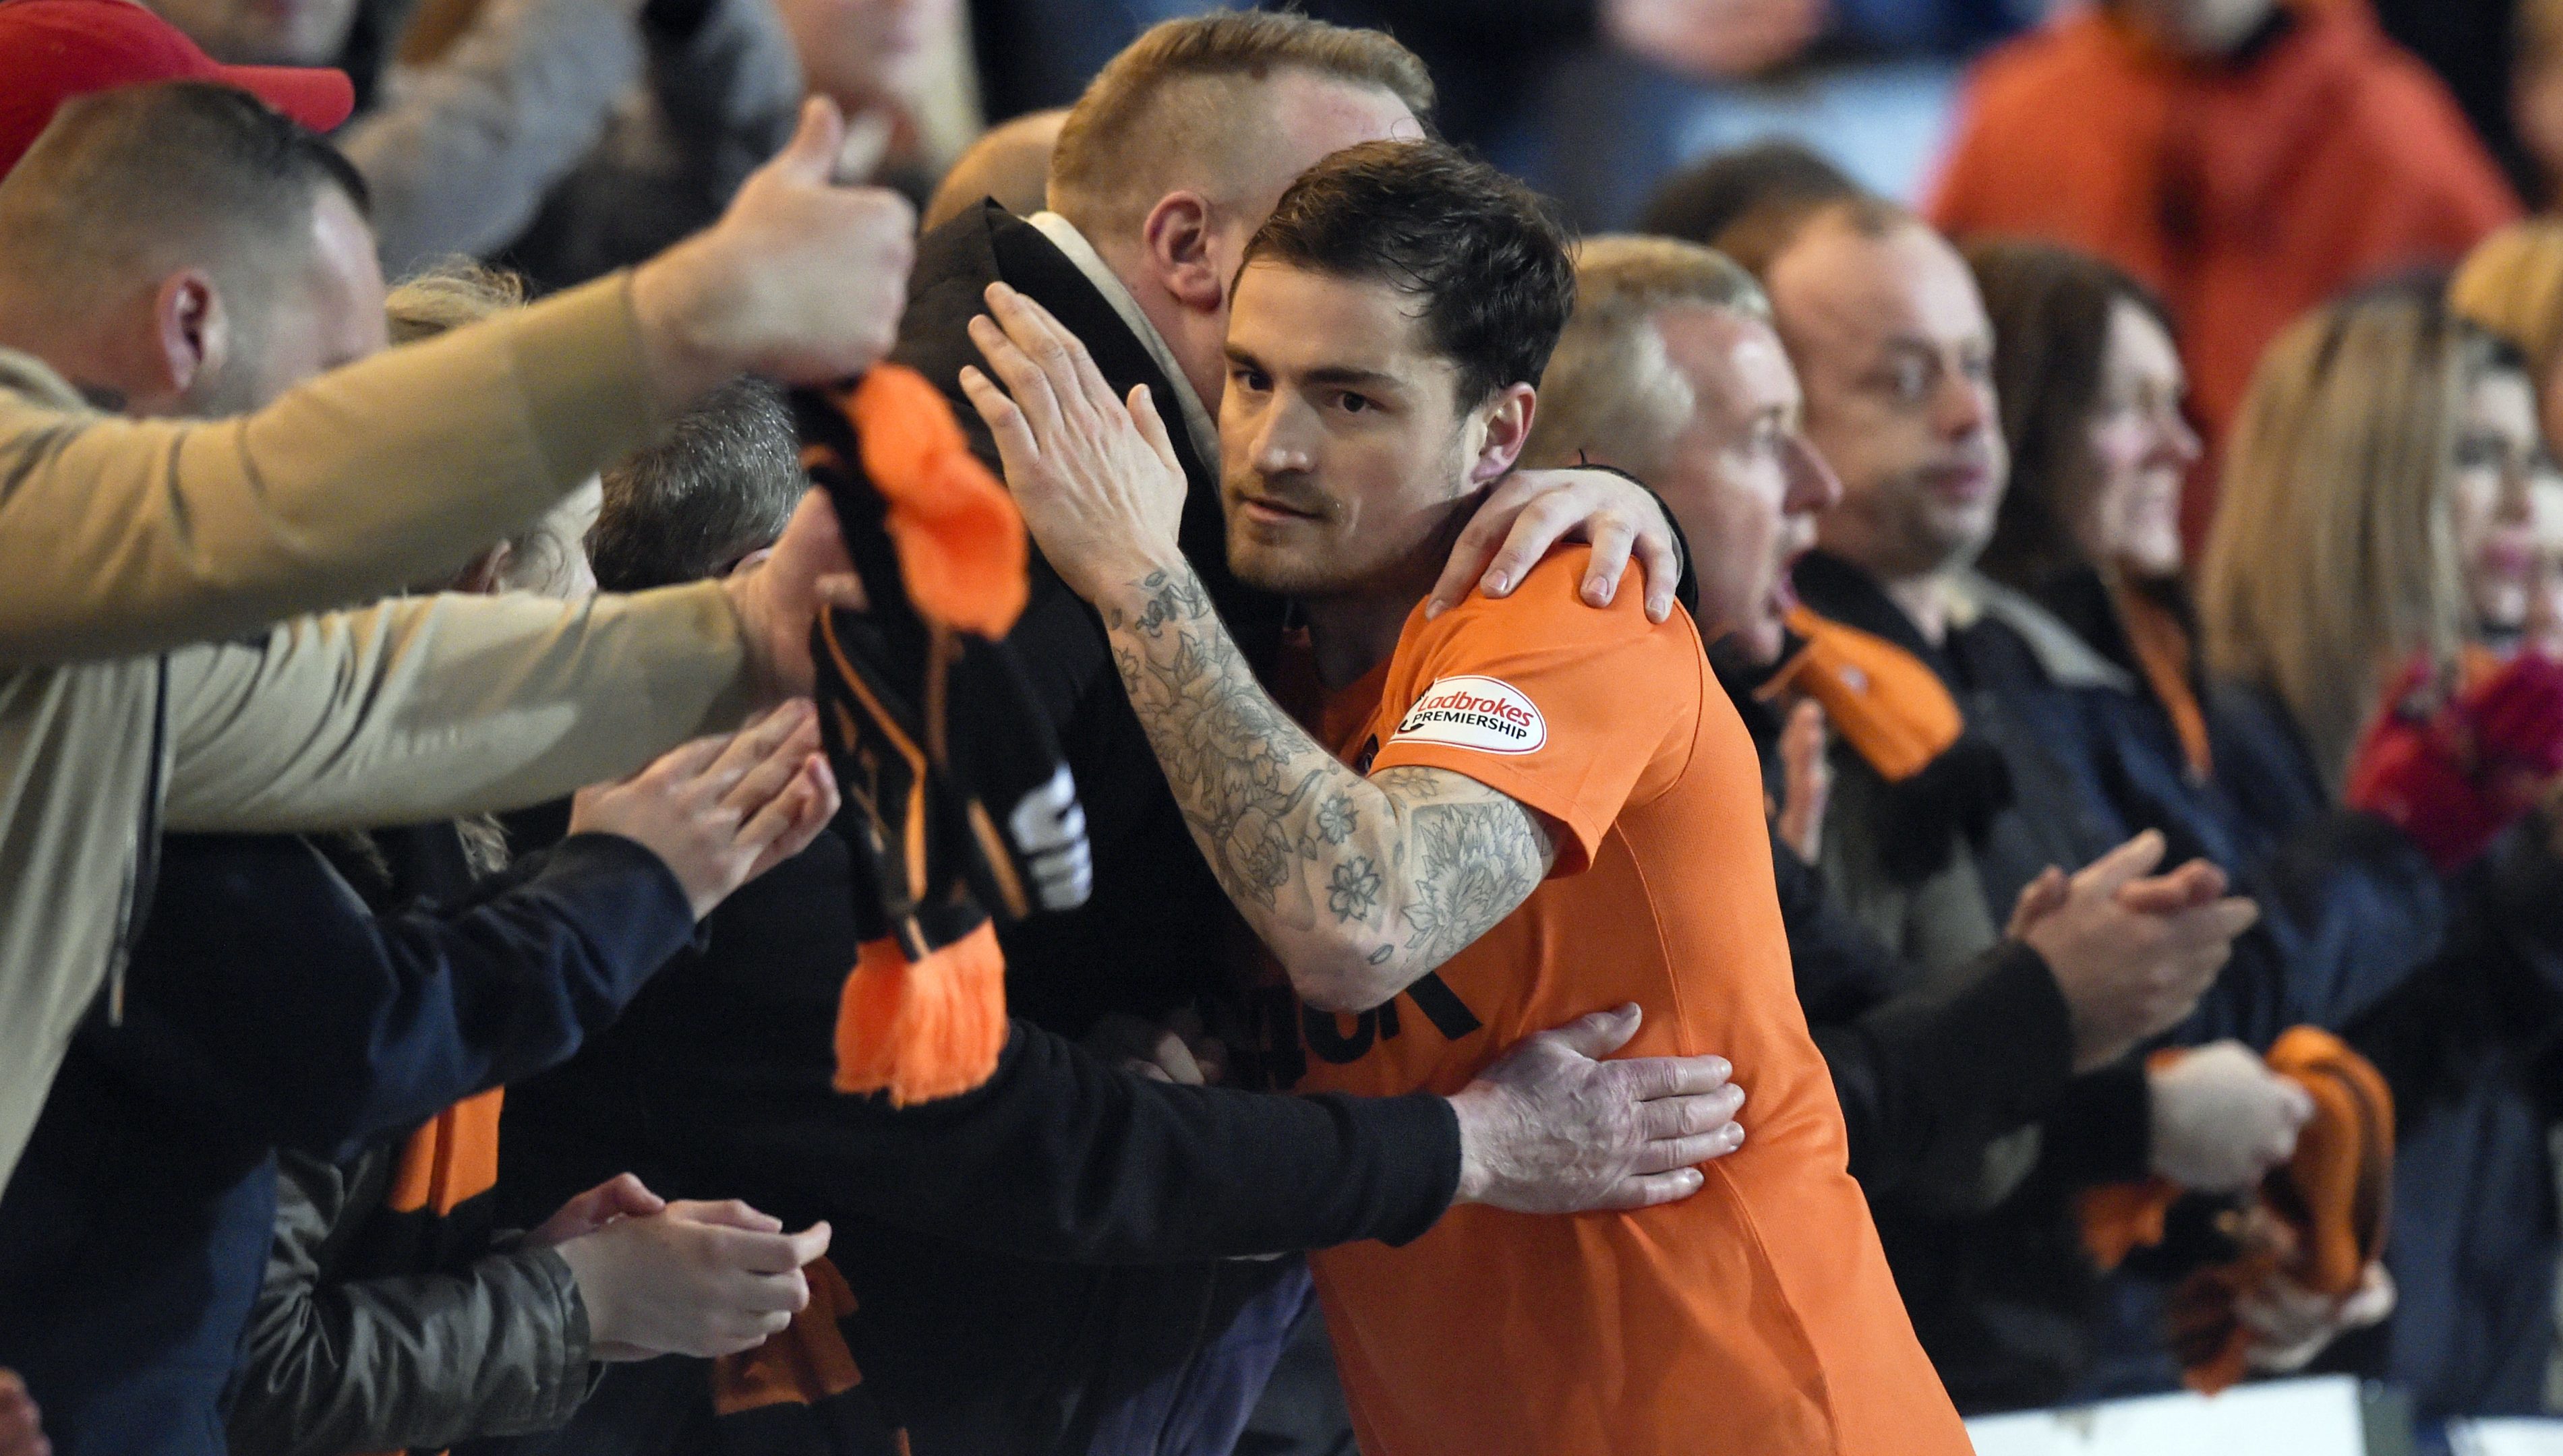 Paul Paton with United fans.